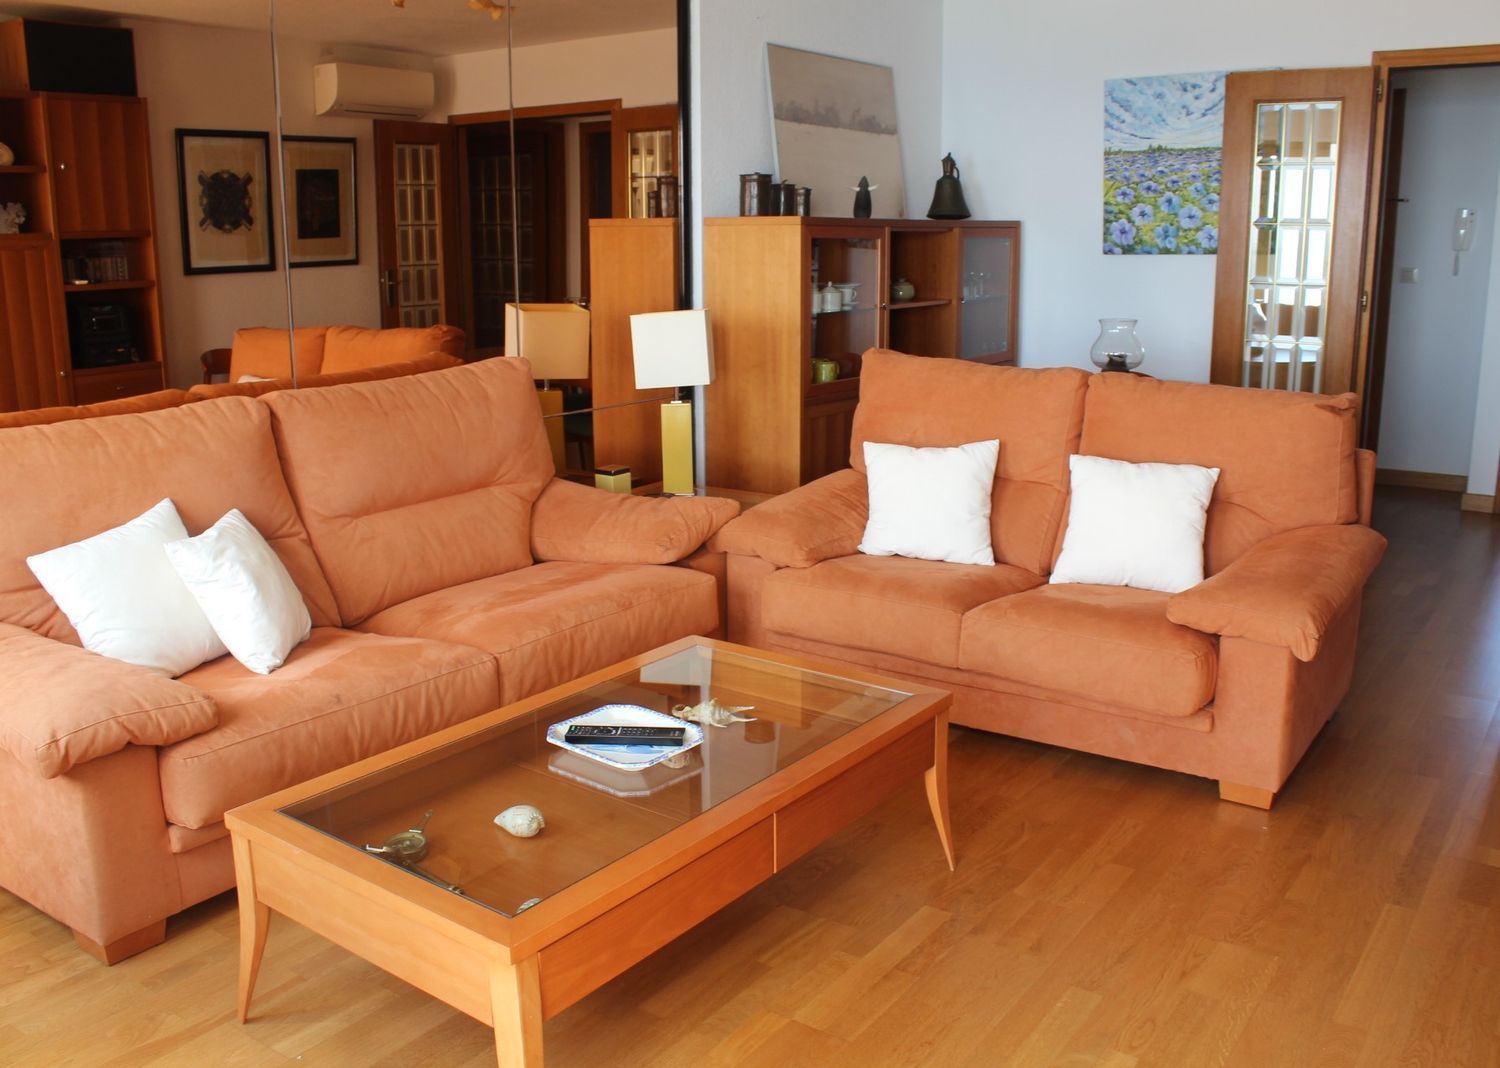 Penthouse for sale on the seafront on Tarragona street, in El Campello